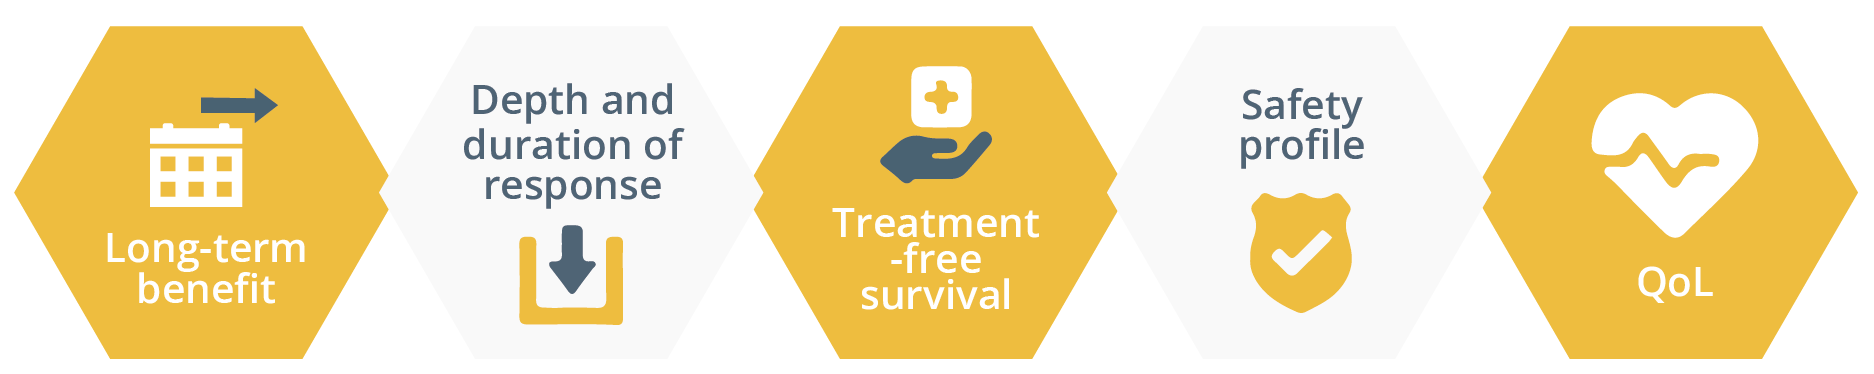 Long-term benefit, depth and duration of response, treatment-free survival, safety and QoL are key hallmarks of combination immunotherapy treatment